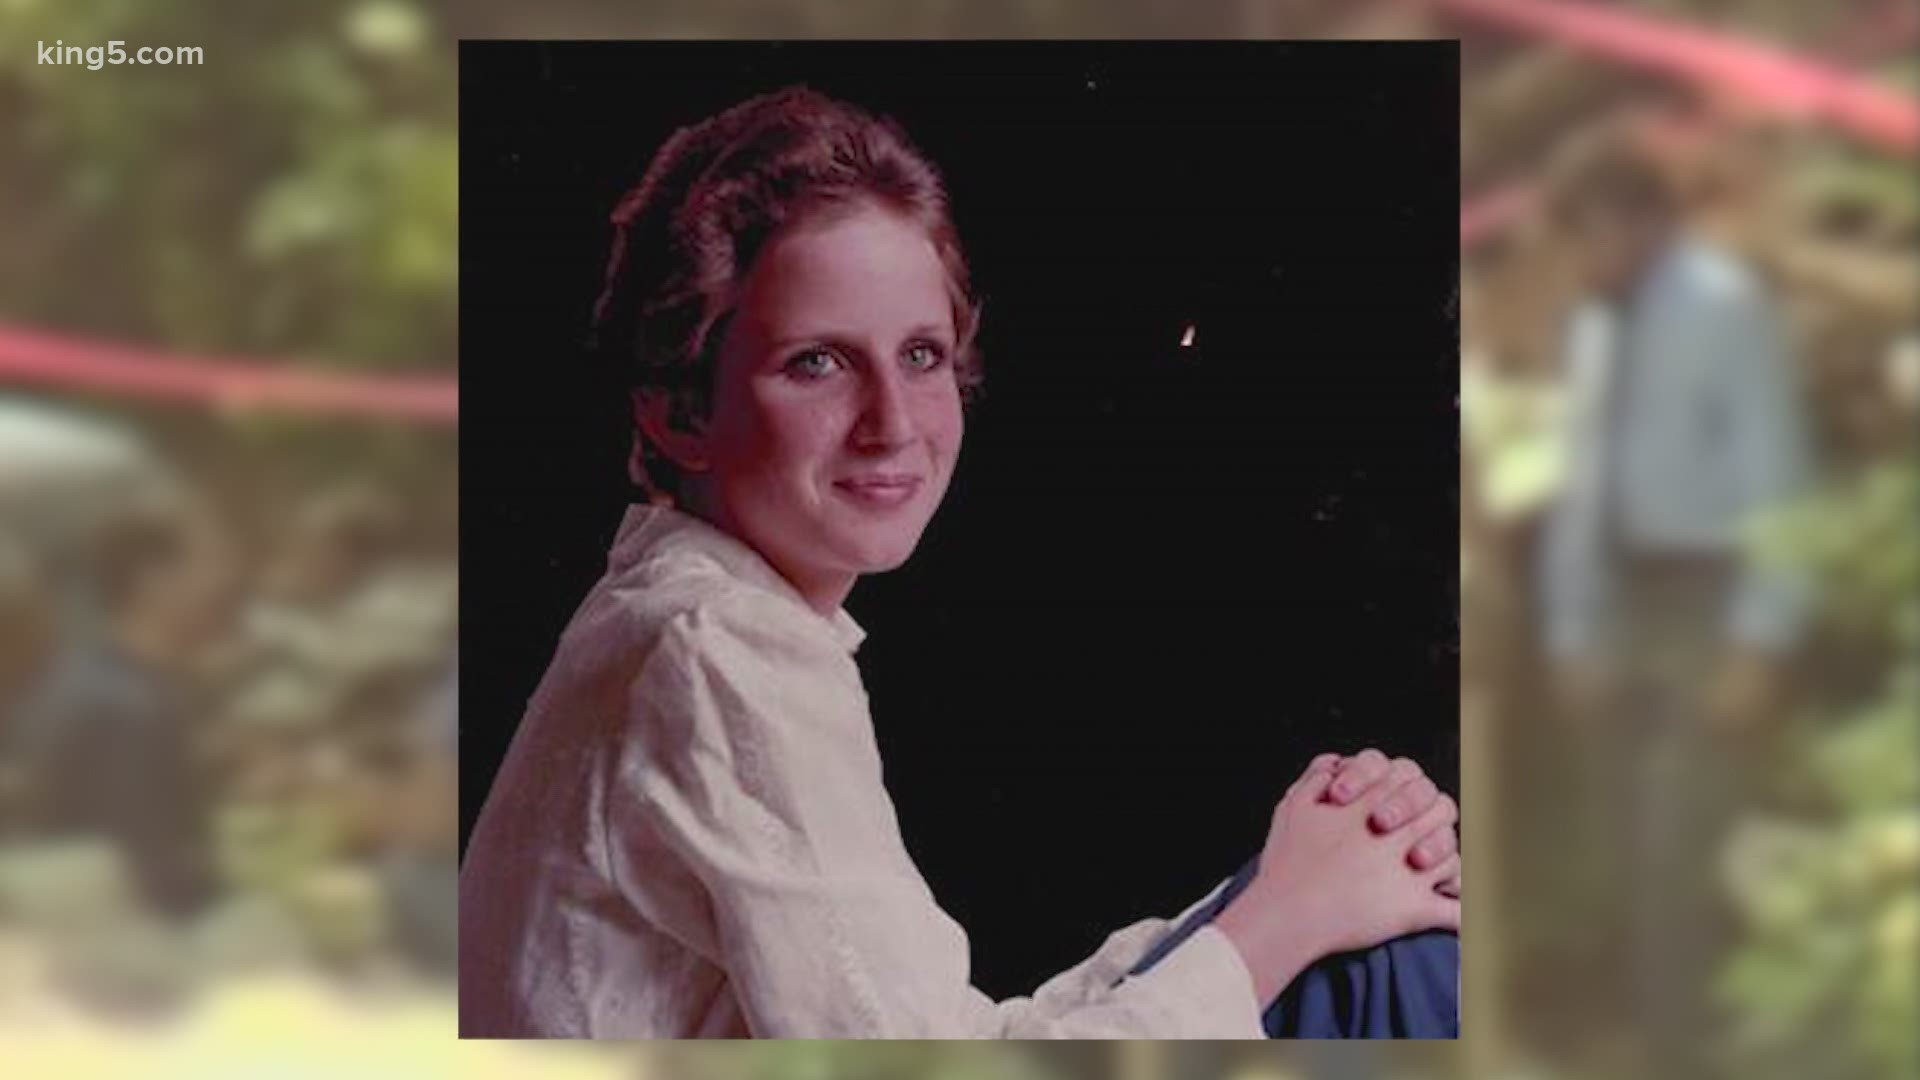 The King County Sheriff's Major Crimes Unit and the DNA Doe Project identified the human remains found in SeaTac in 1984 as 14-year-old Wendy Stephens, of Colorado.